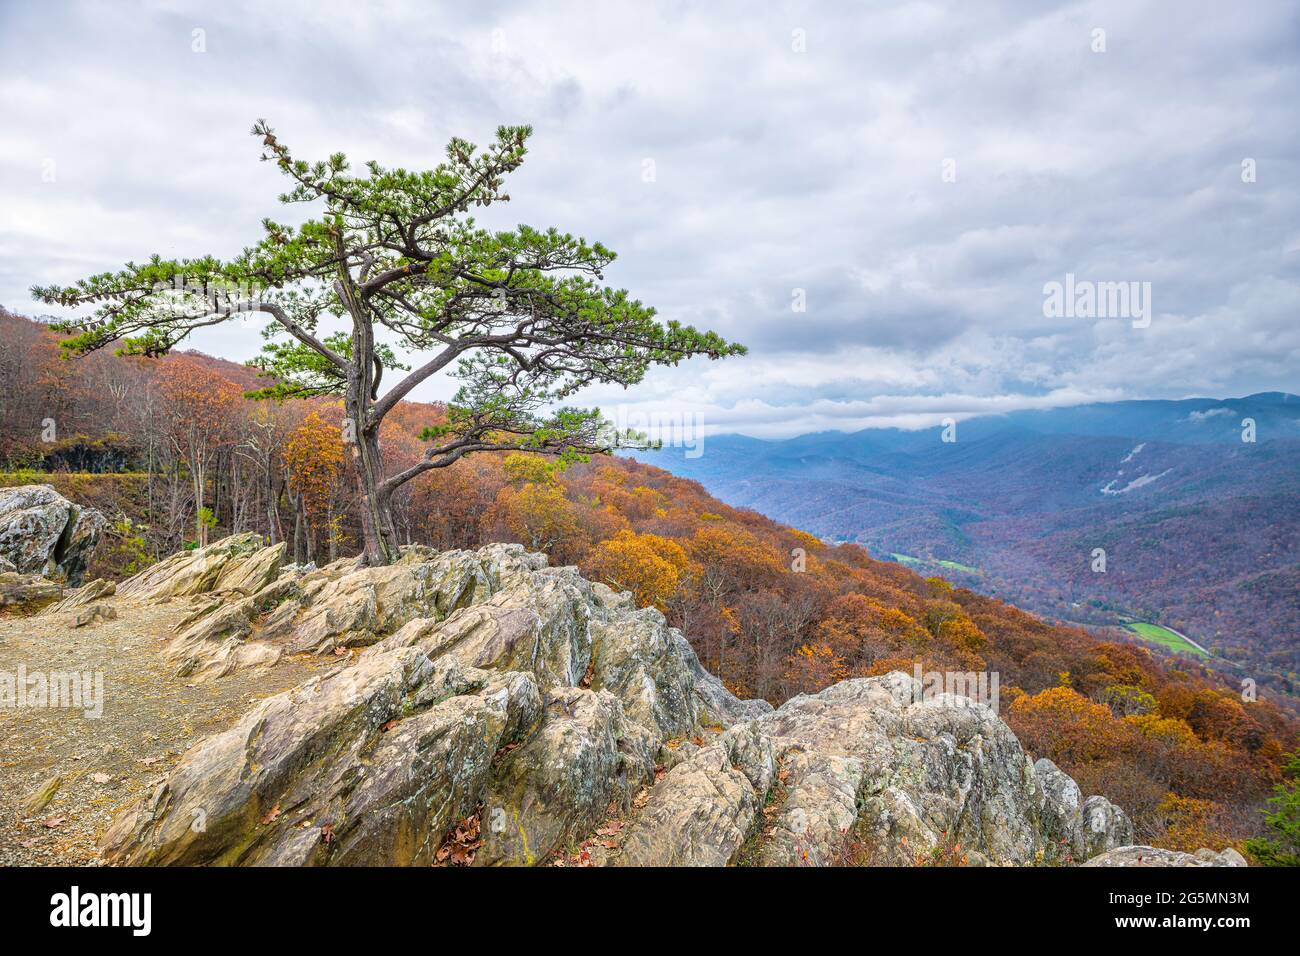 Blue Ridge parkway mountains in autumn fall season with orange foliage on trees and one cedar tree on cliff at Ravens Roost Overlook in Virginia Stock Photo